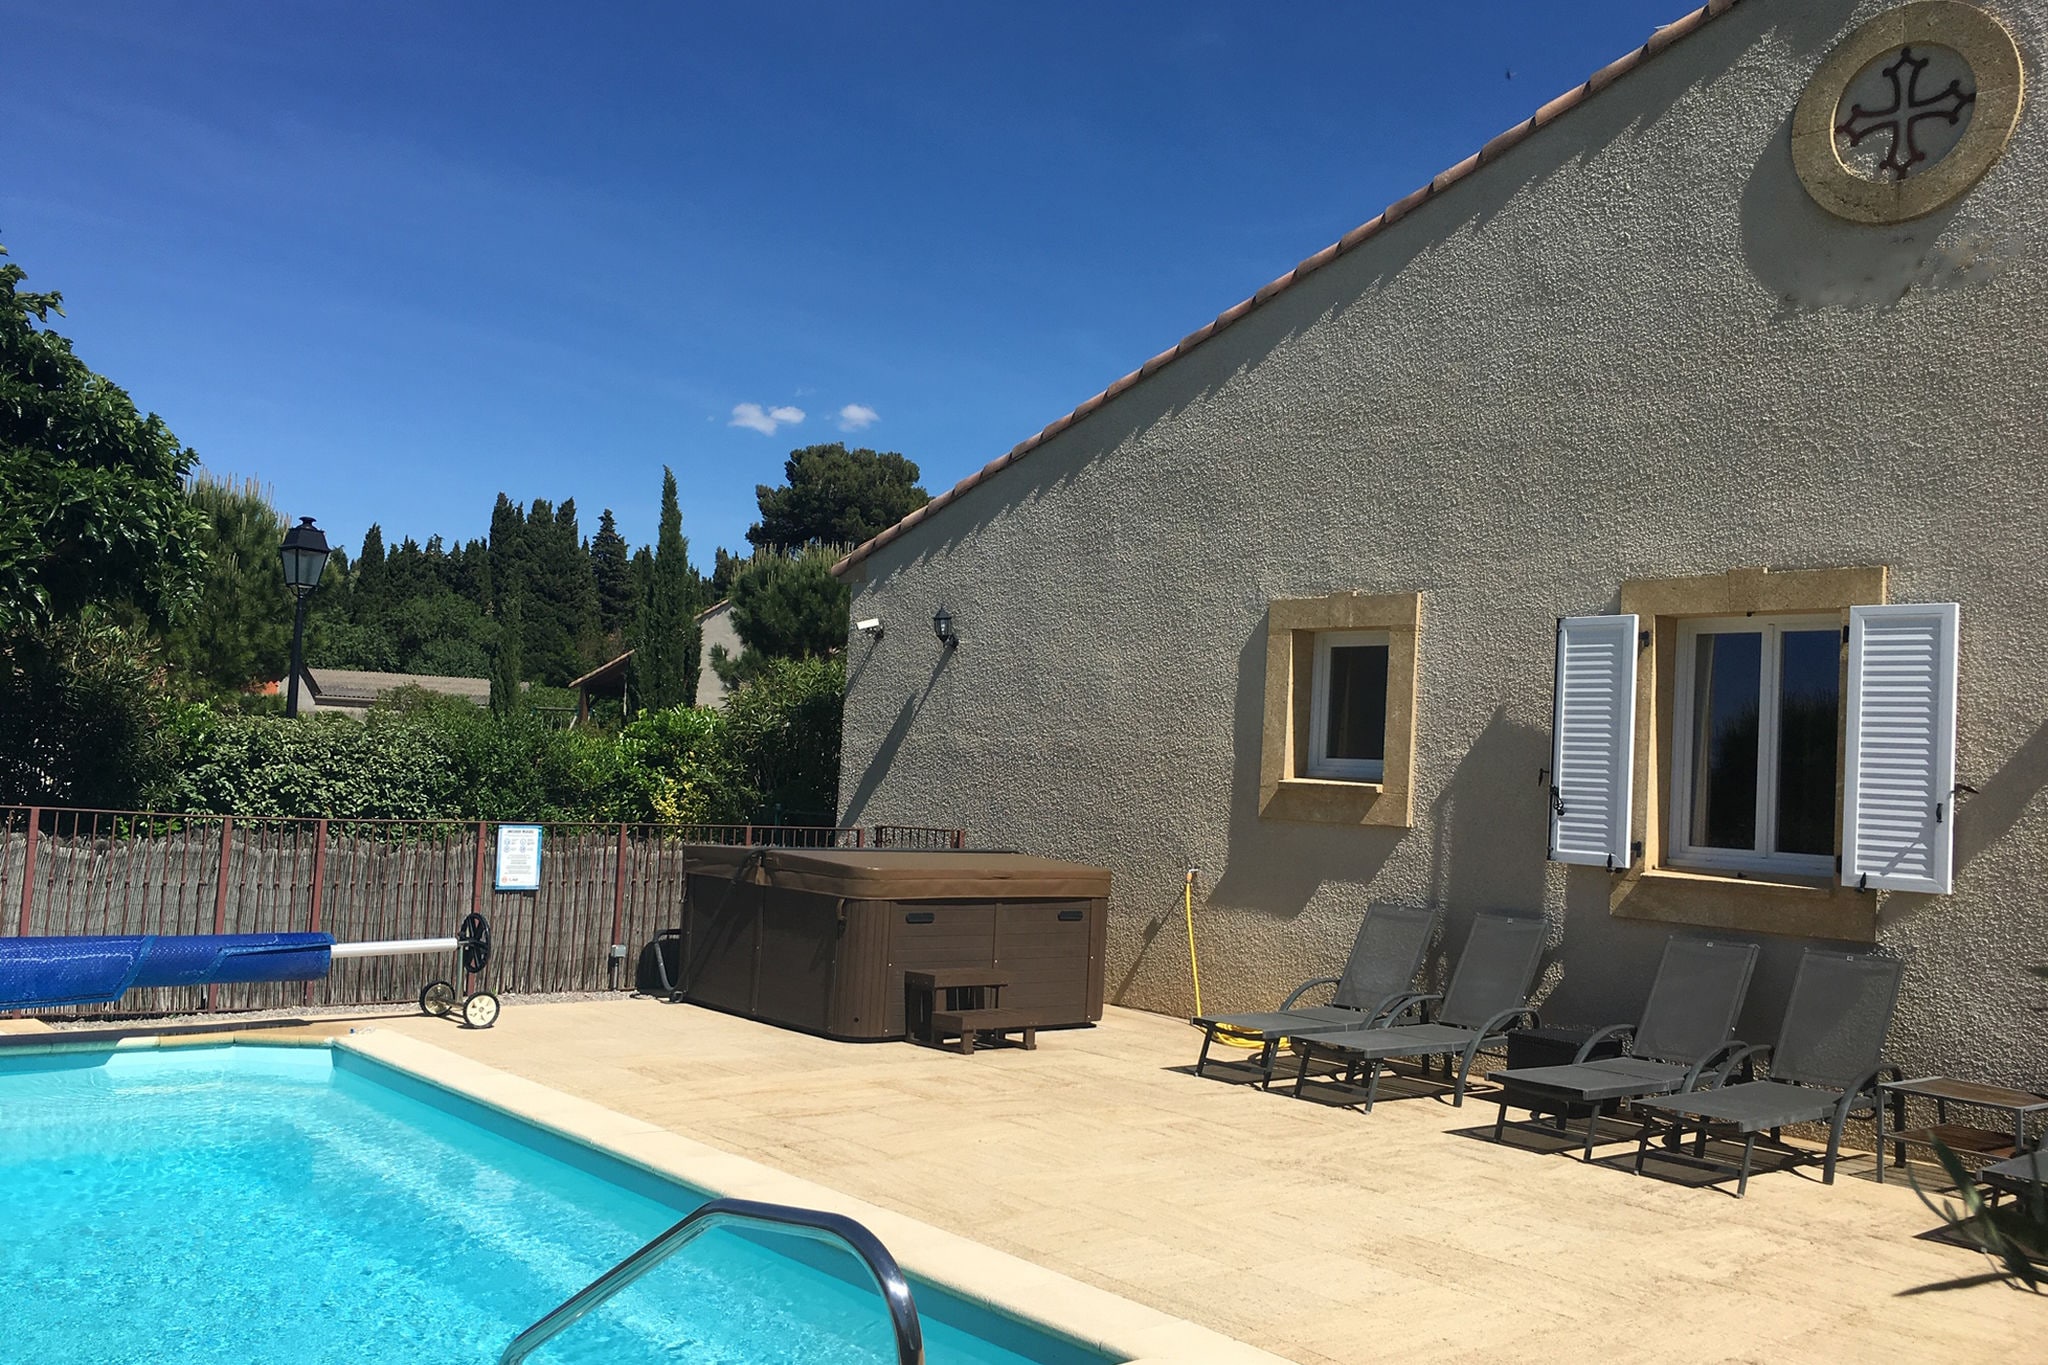 Detached villa in the South of France with a heated private pool, hot tub